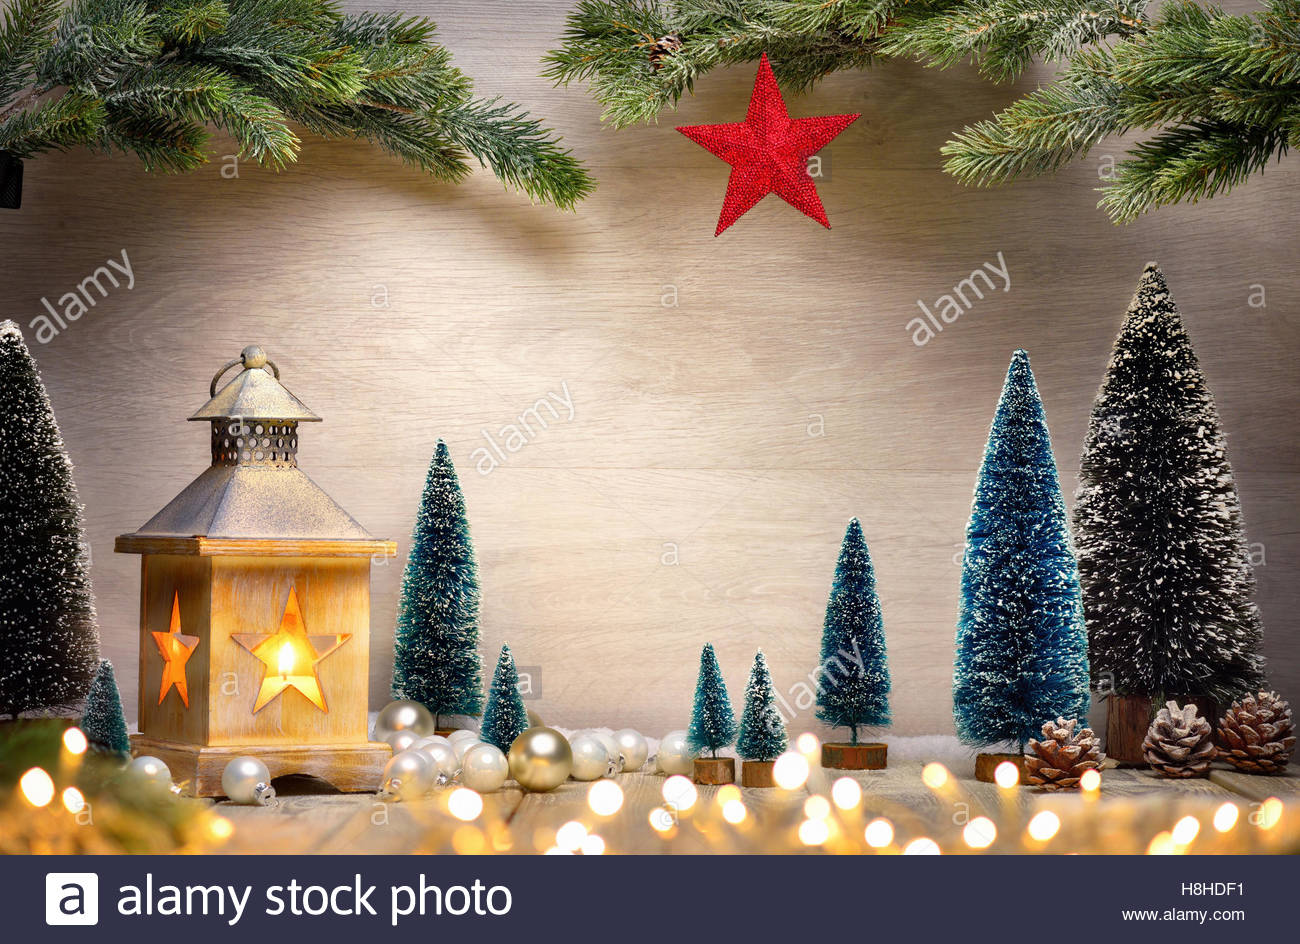 Christmas Scene Background With A Lantern Trees Fir Branches